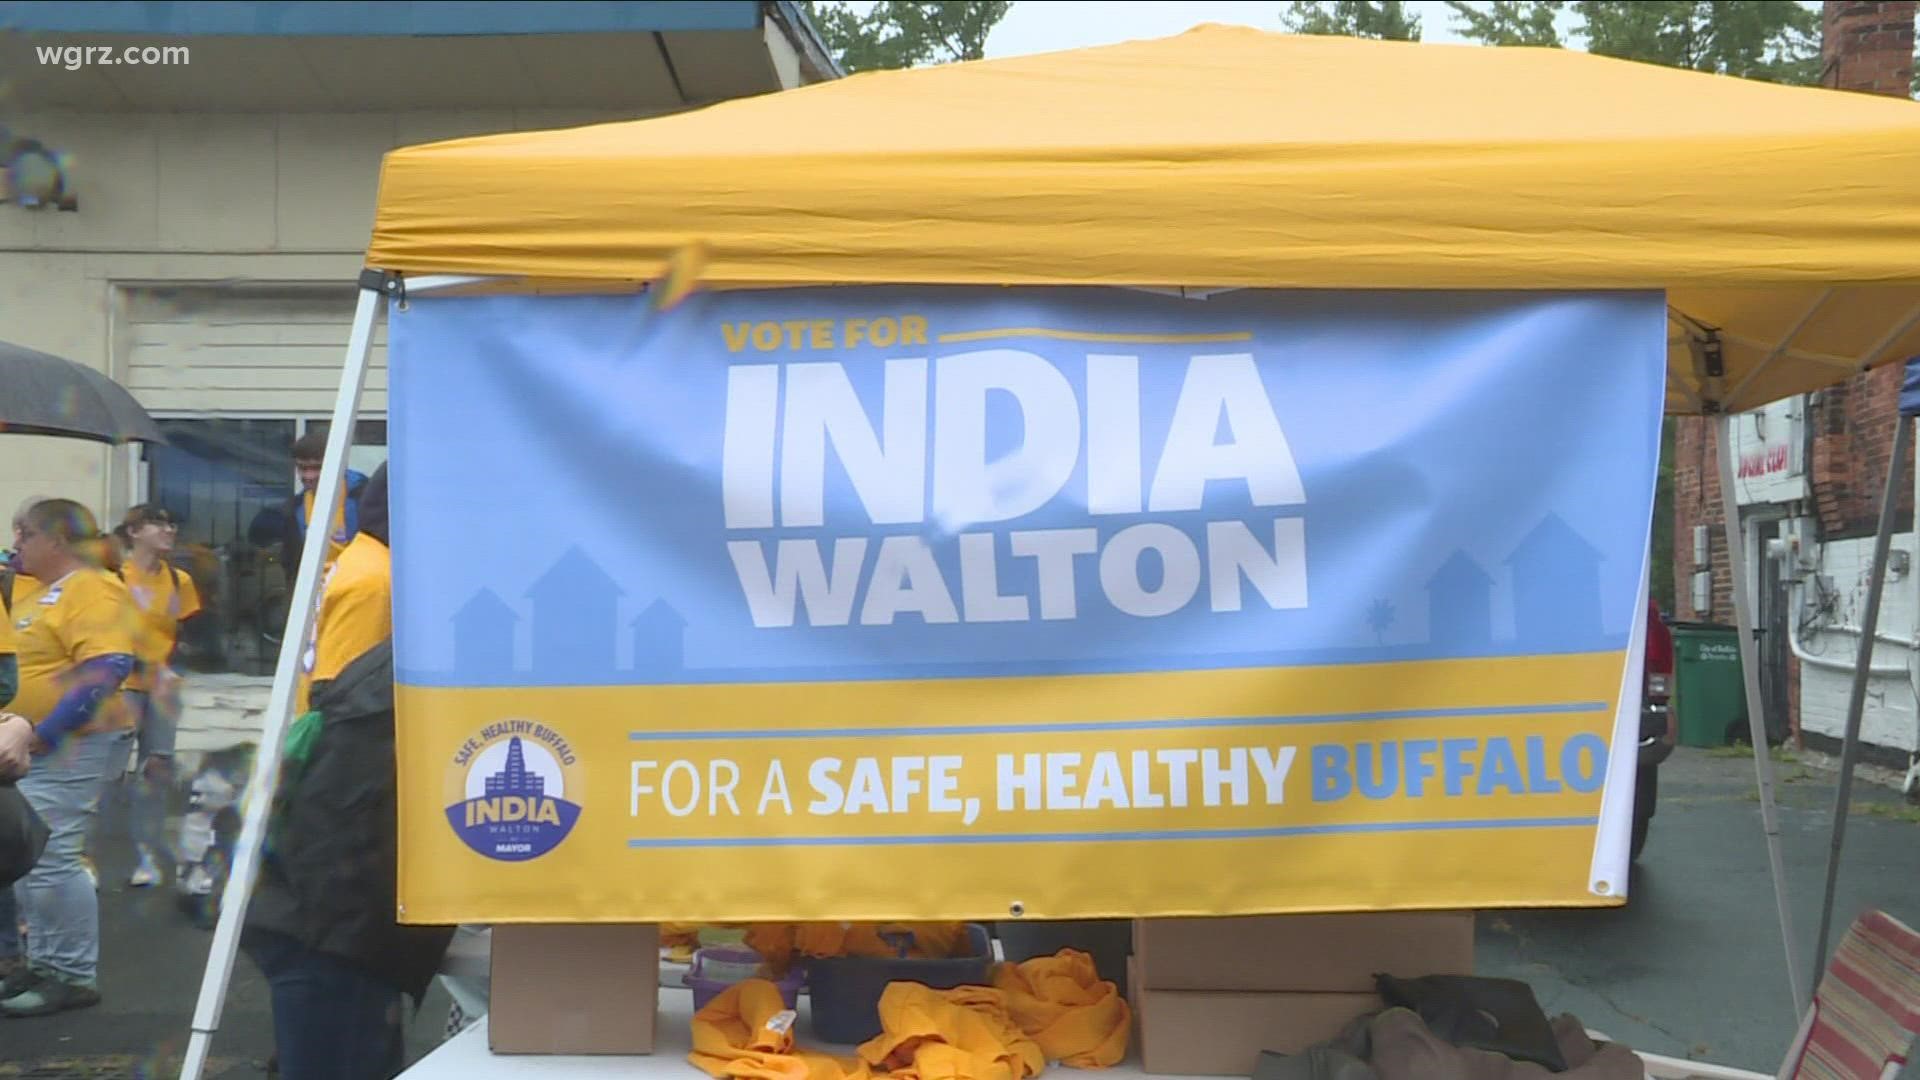 It was last summer that India Walton shocked many people here in the city of Buffalo and even around the country. So what has Walton been up to since November?